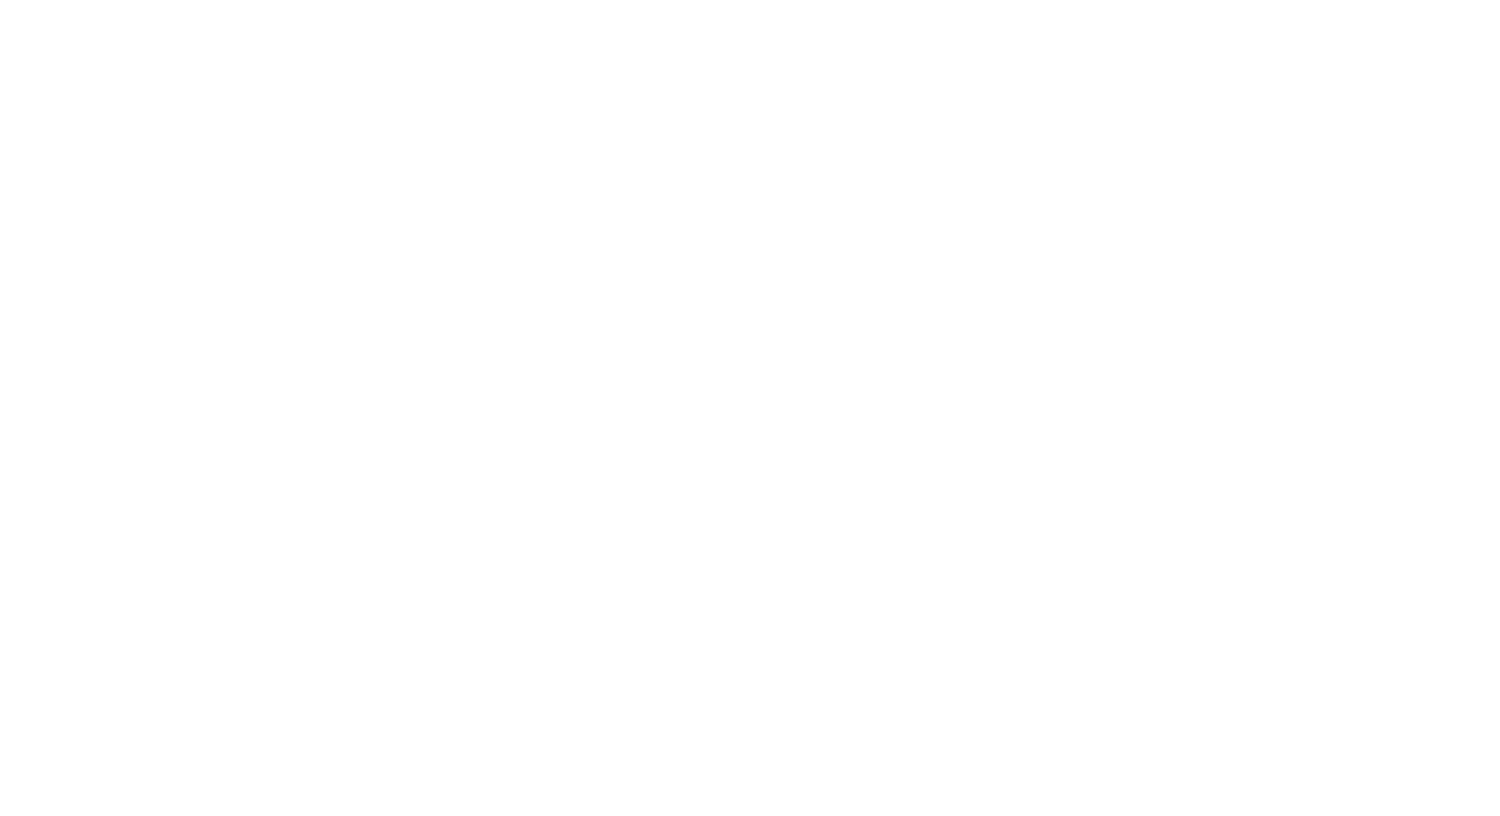 Serenity at The Forge